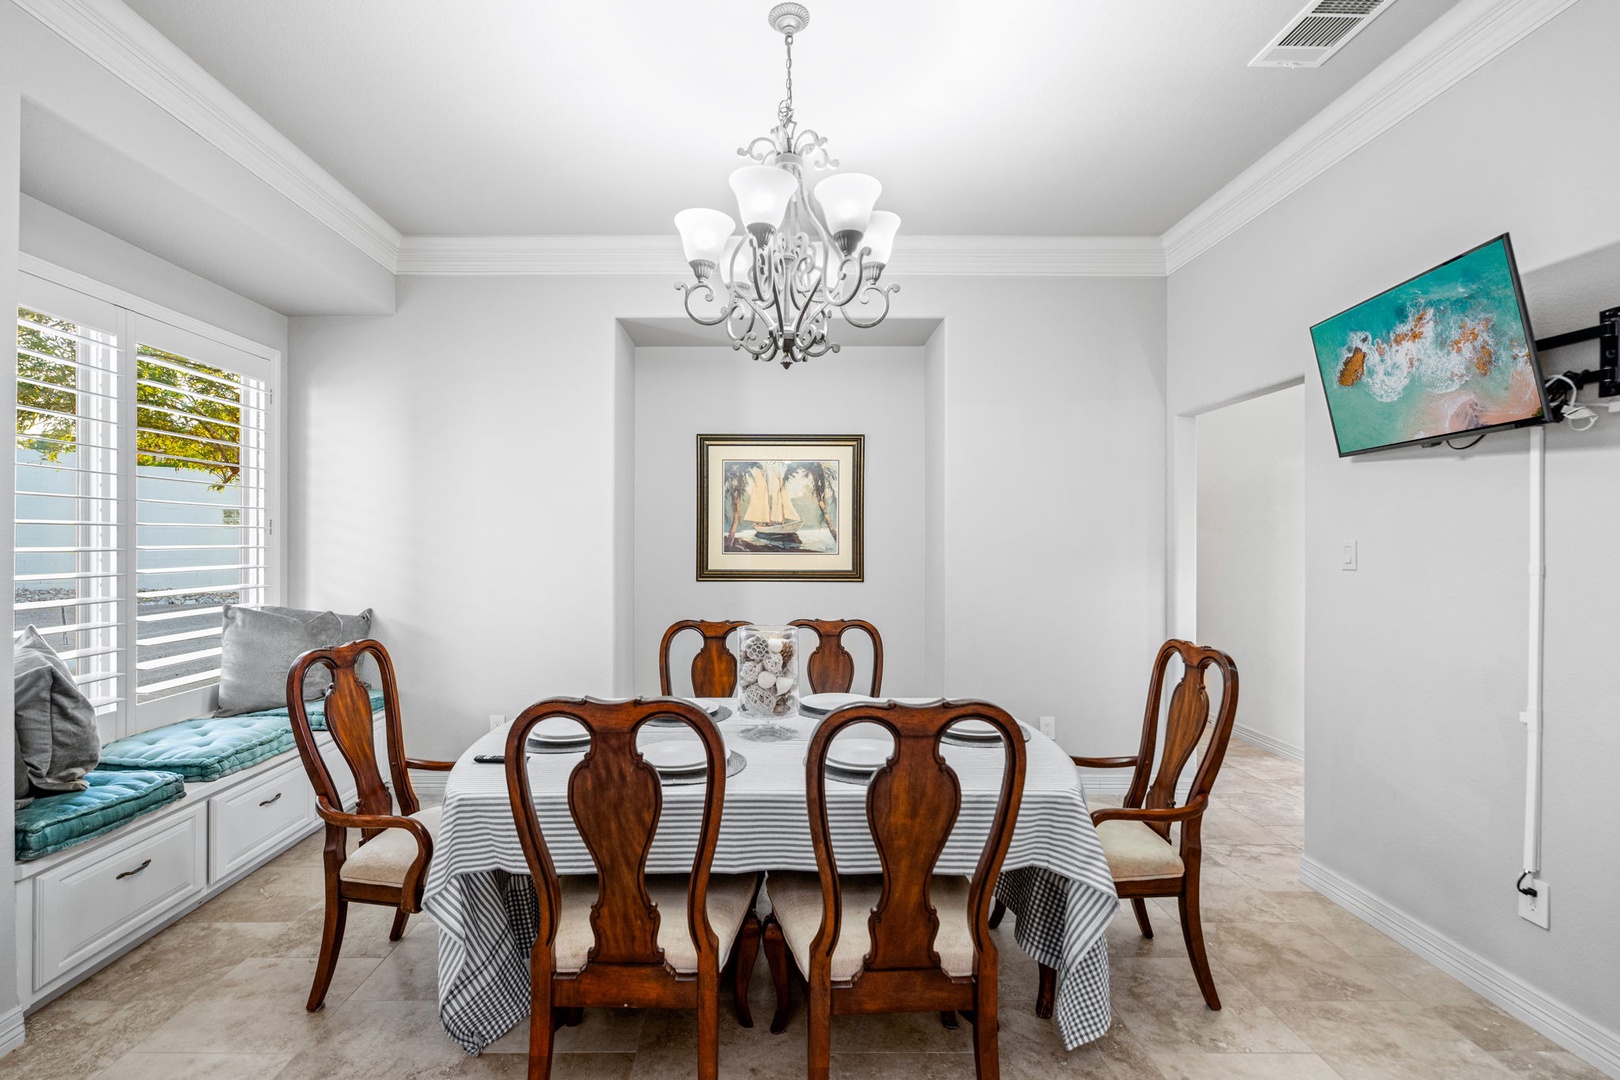 Gather for more formal meals at the dining table, offering seating for 6